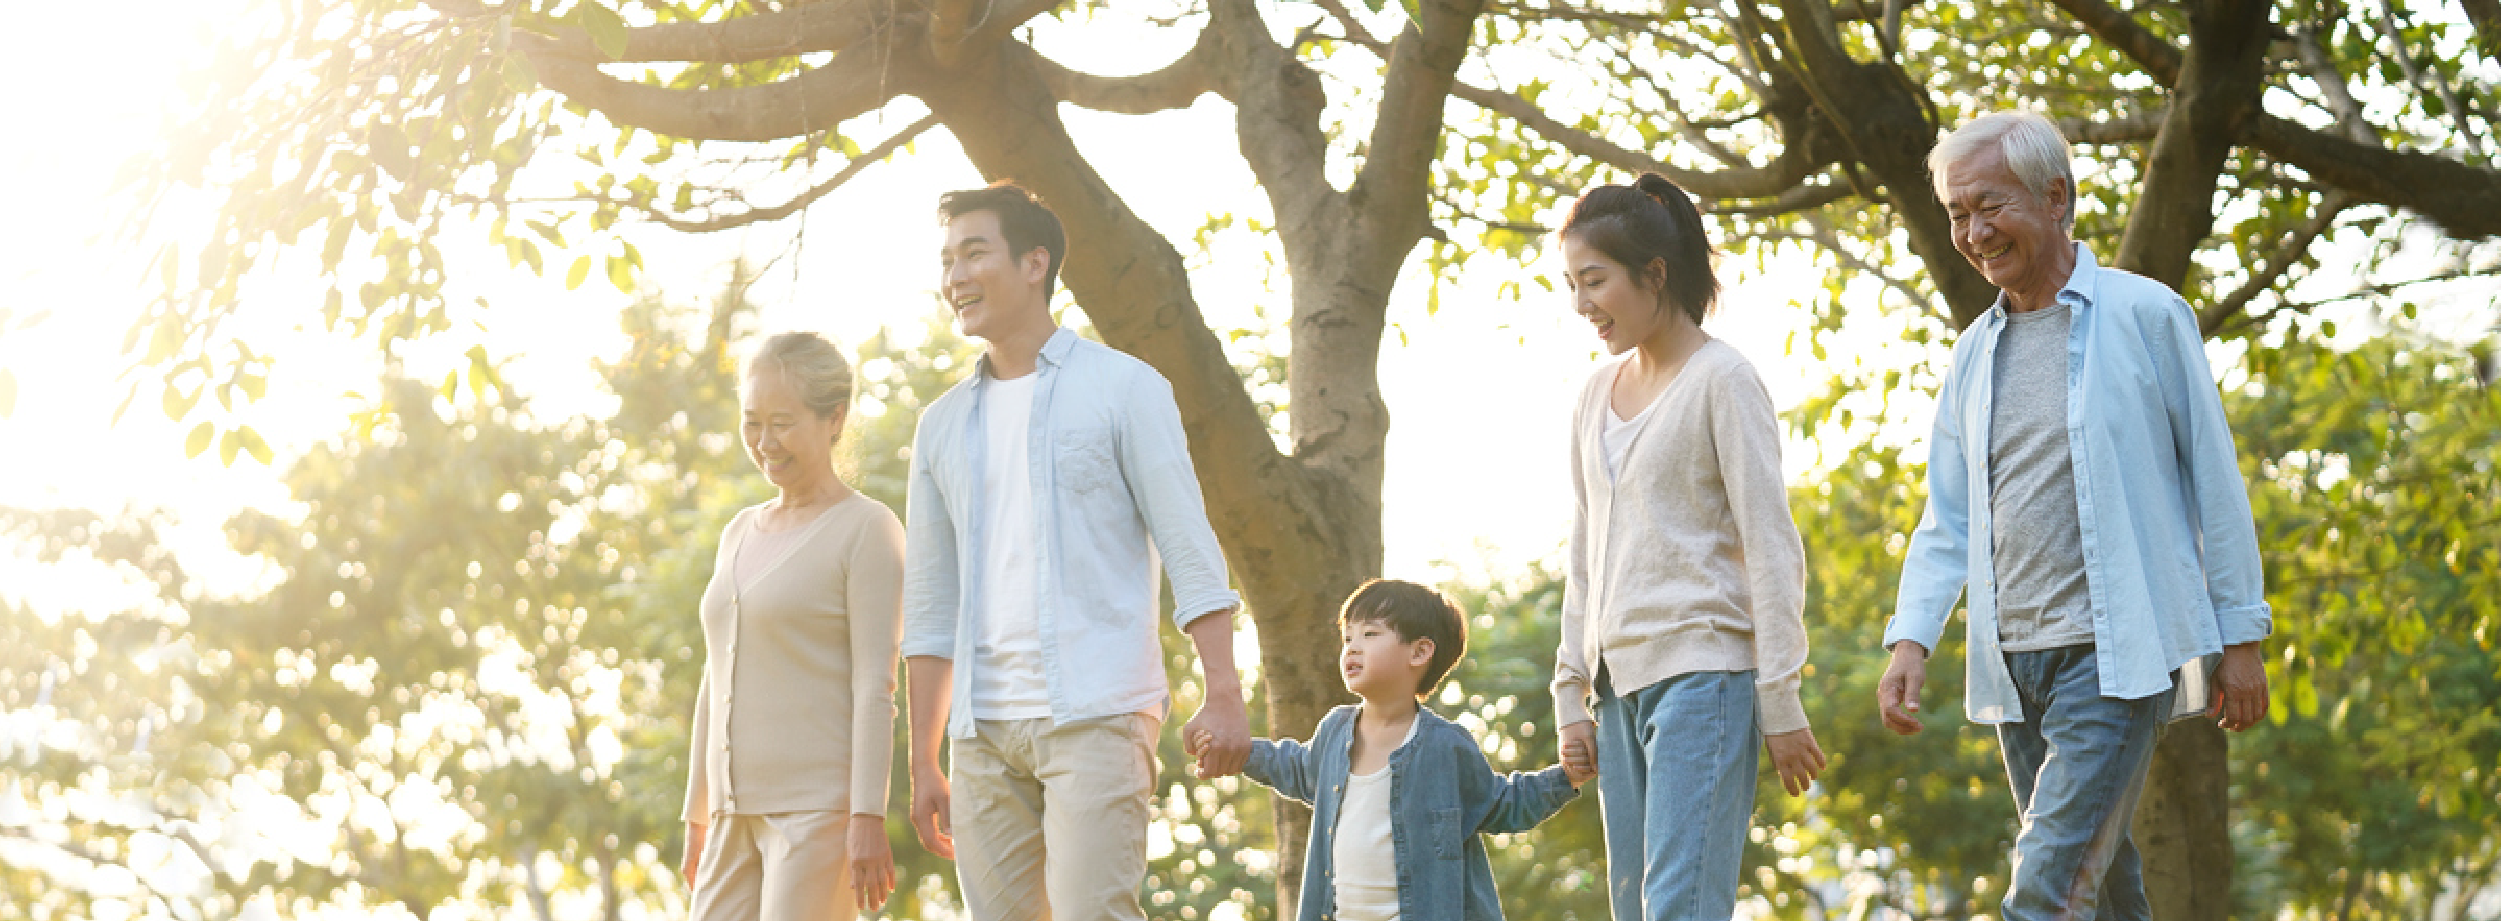 a header of a family walking used for the SECURE Act 2.0 piece